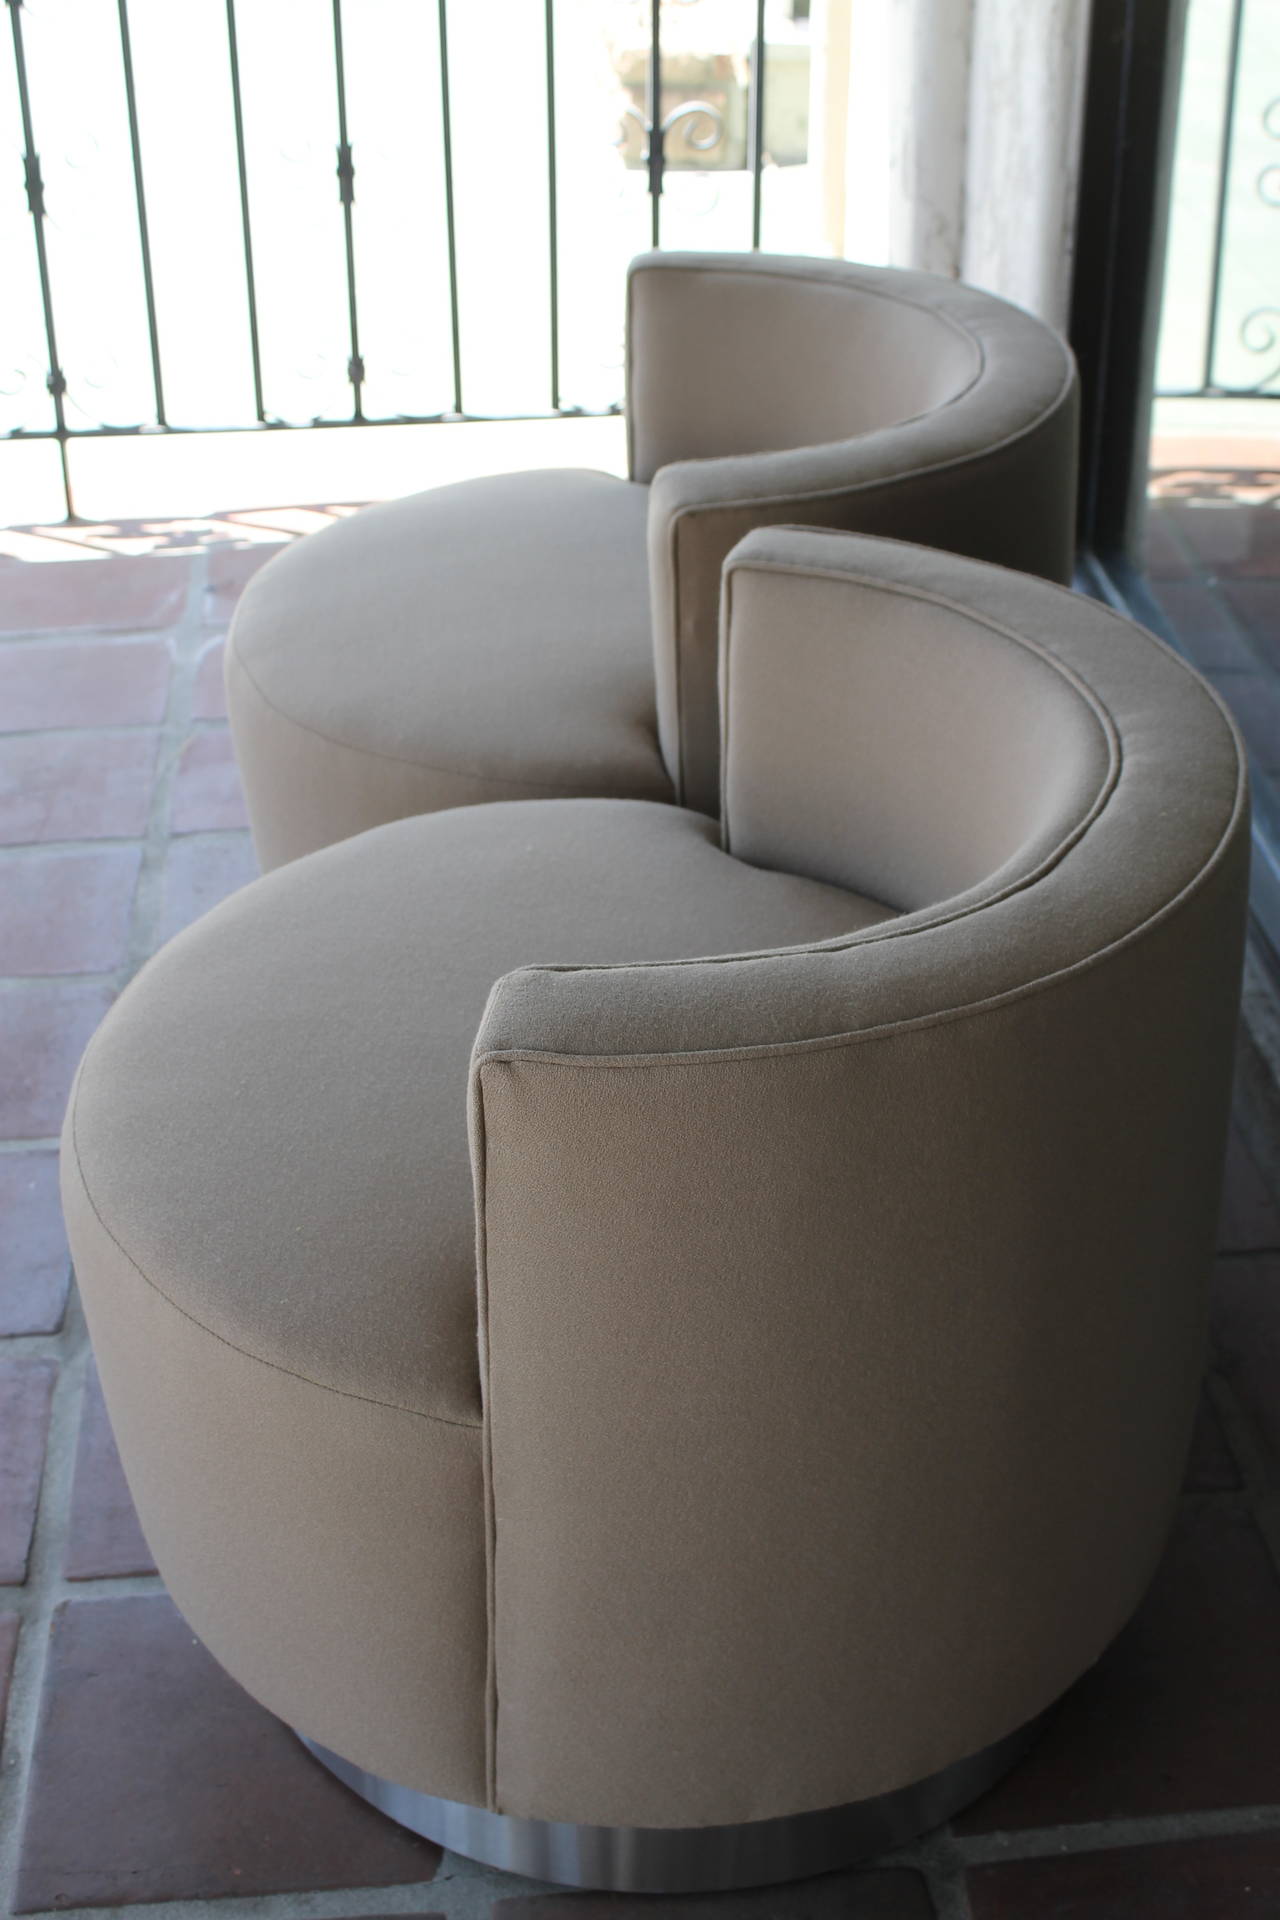 Pair of barrel chairs that swivel with chrome base.  In the style of Milo Baughman or Steve Chase.  Chairs have been professionally reupholstered with a wonderful beige / taupe fabric.  Chairs measure 28